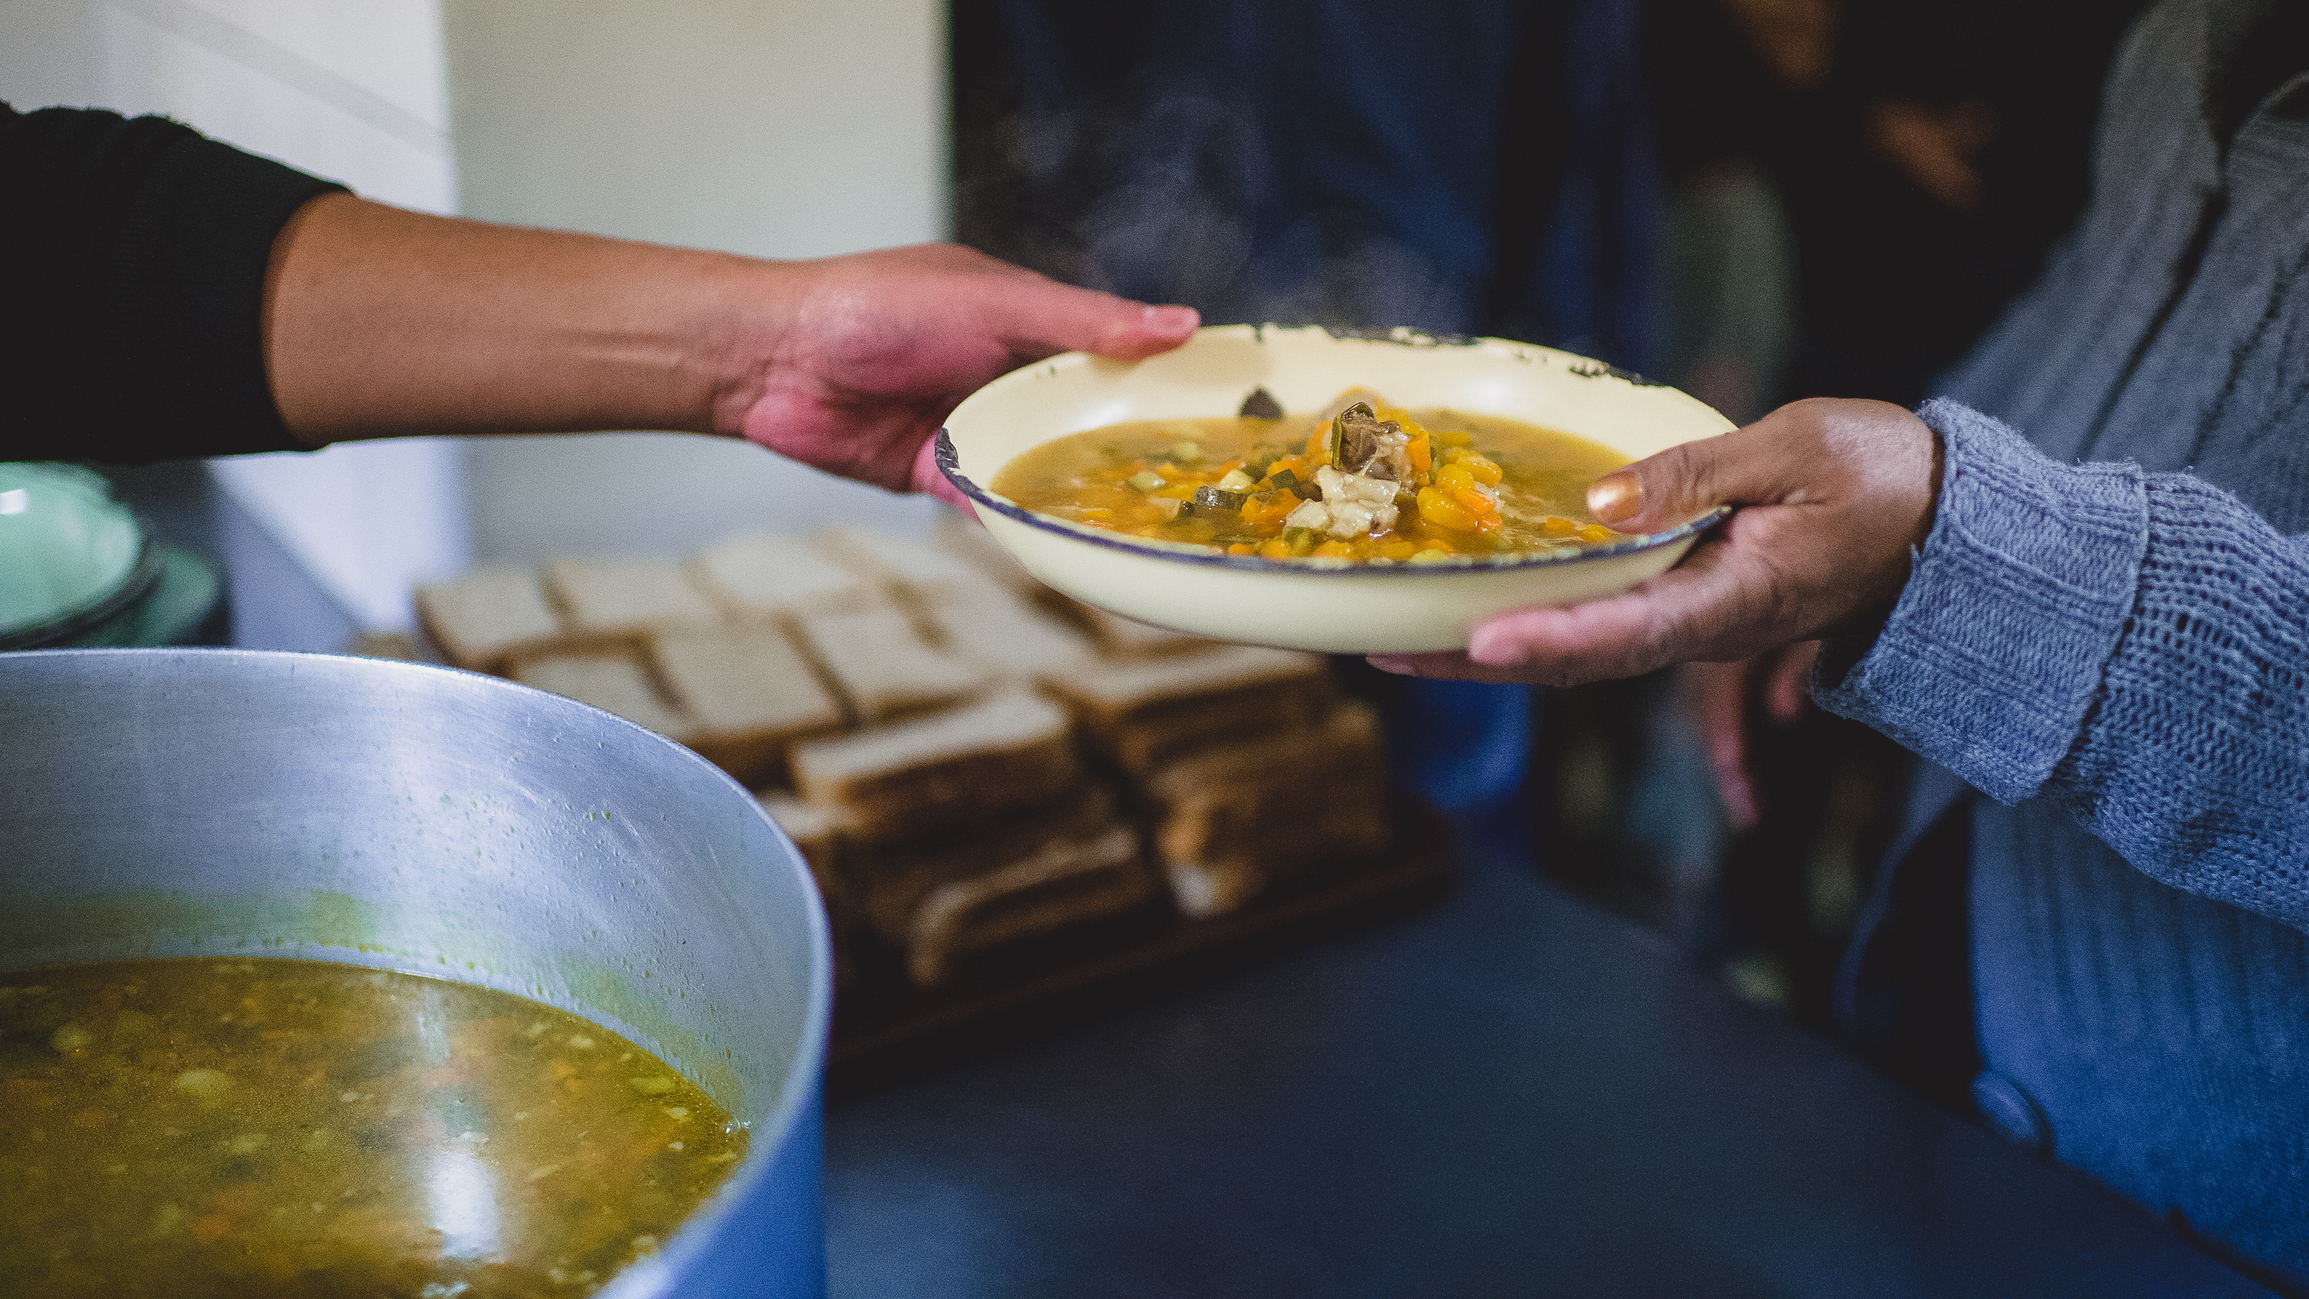 Passing a plate of food with stew soup and bread to the homeless